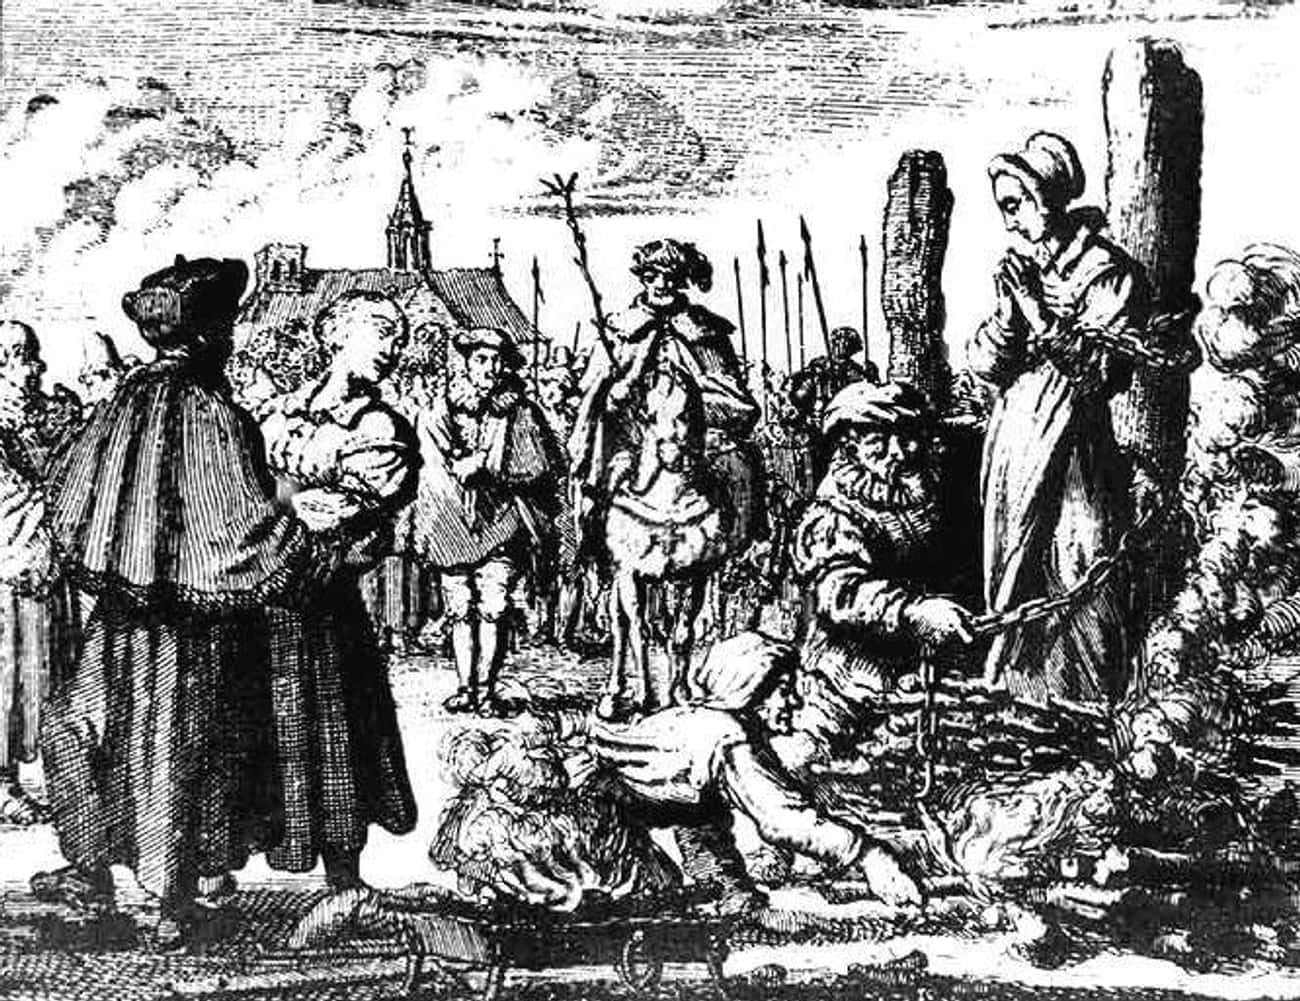 MYTH: Accused Witches Were Burned at the Stake